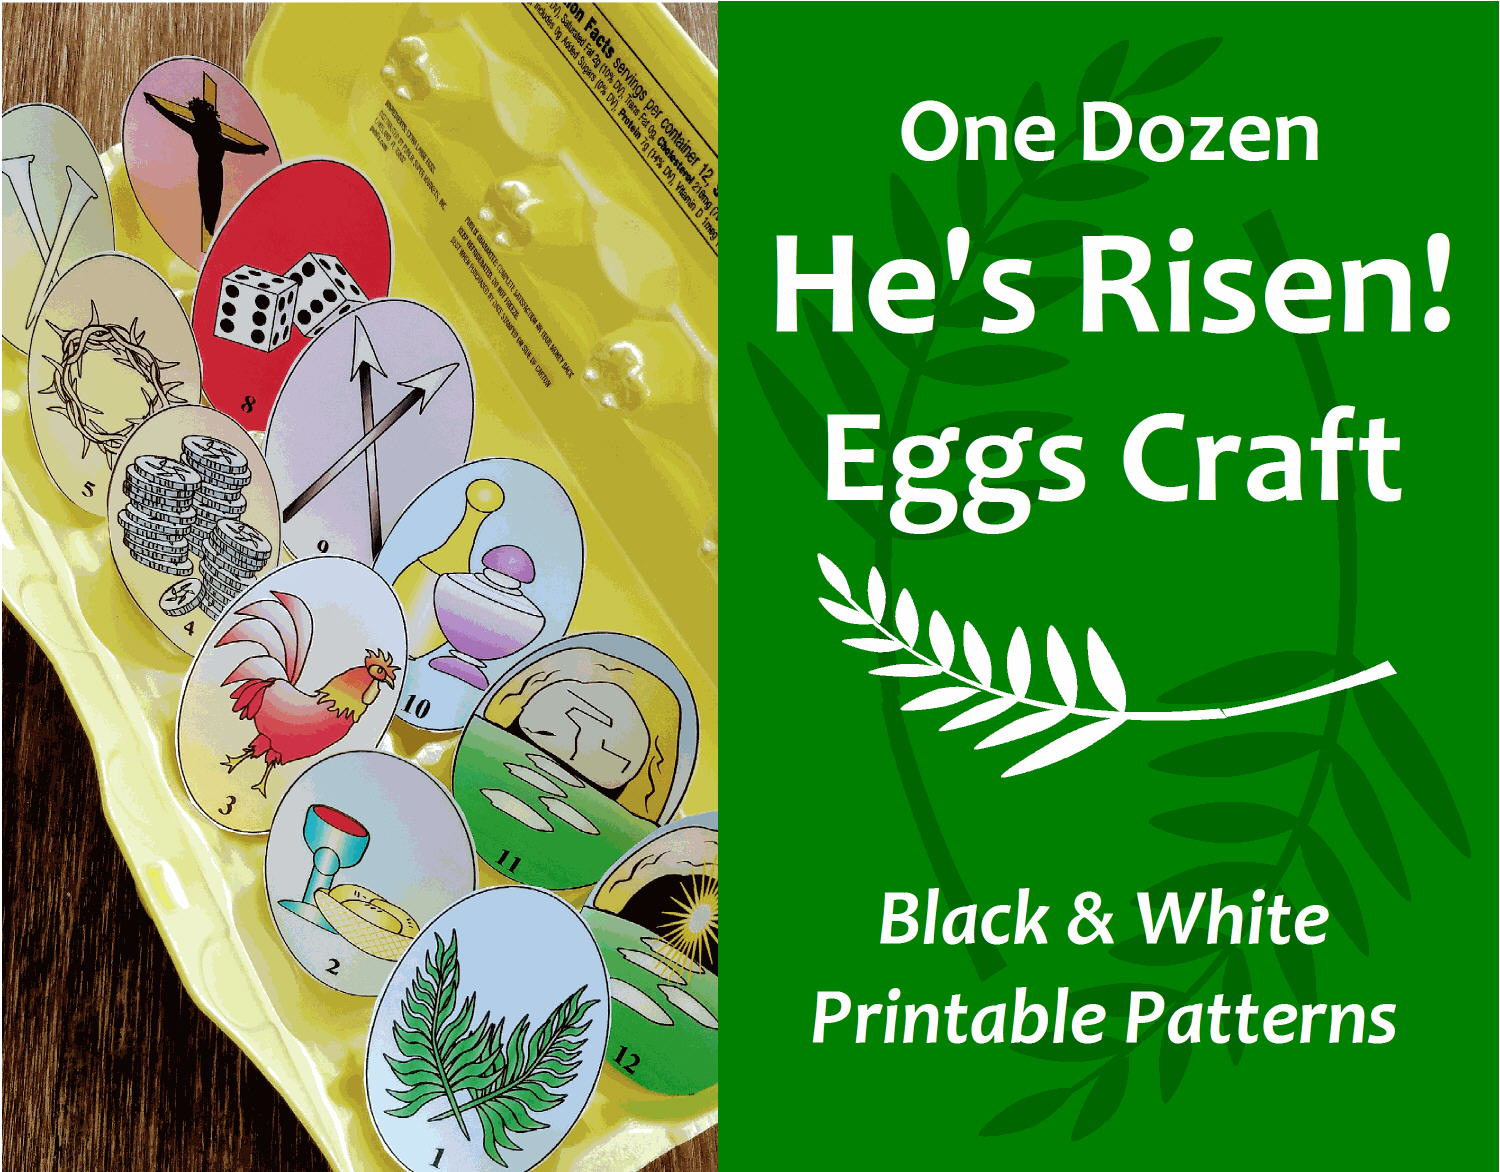 The egg pictures tell the Easter resurrection story